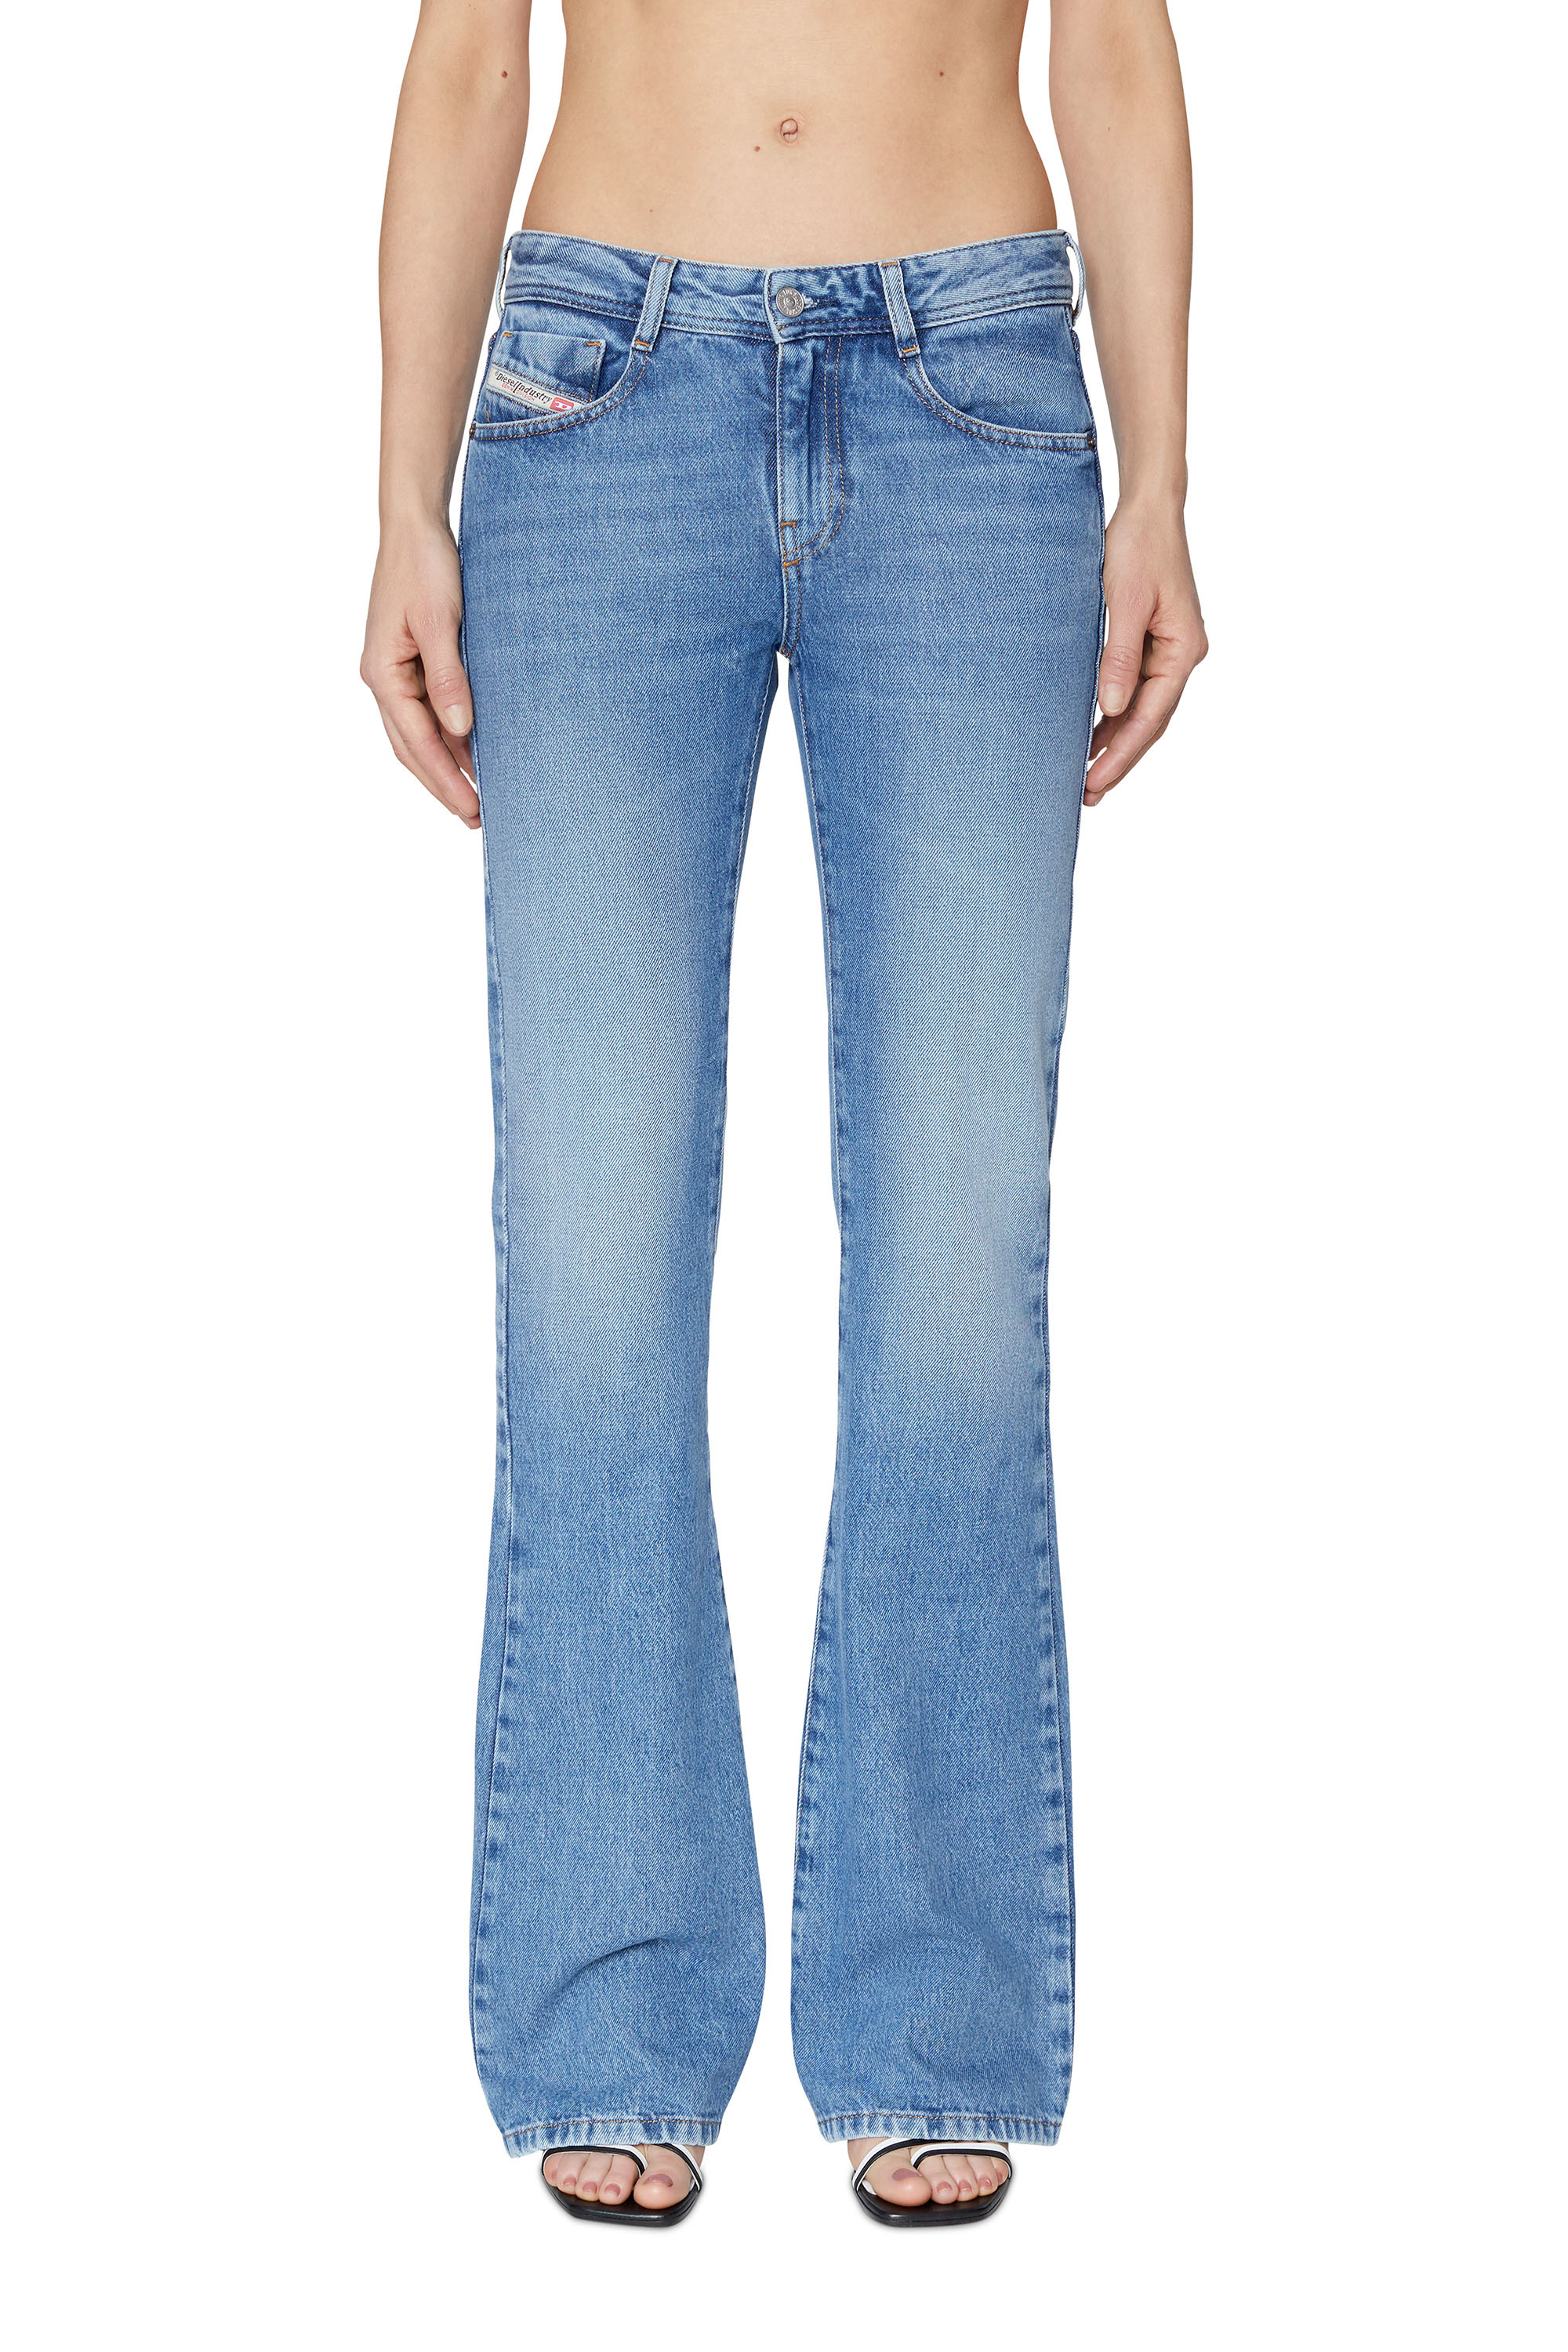 1969 D-EBBEY 09C16 Bootcut and Flare Jeans, Blu medio - Jeans